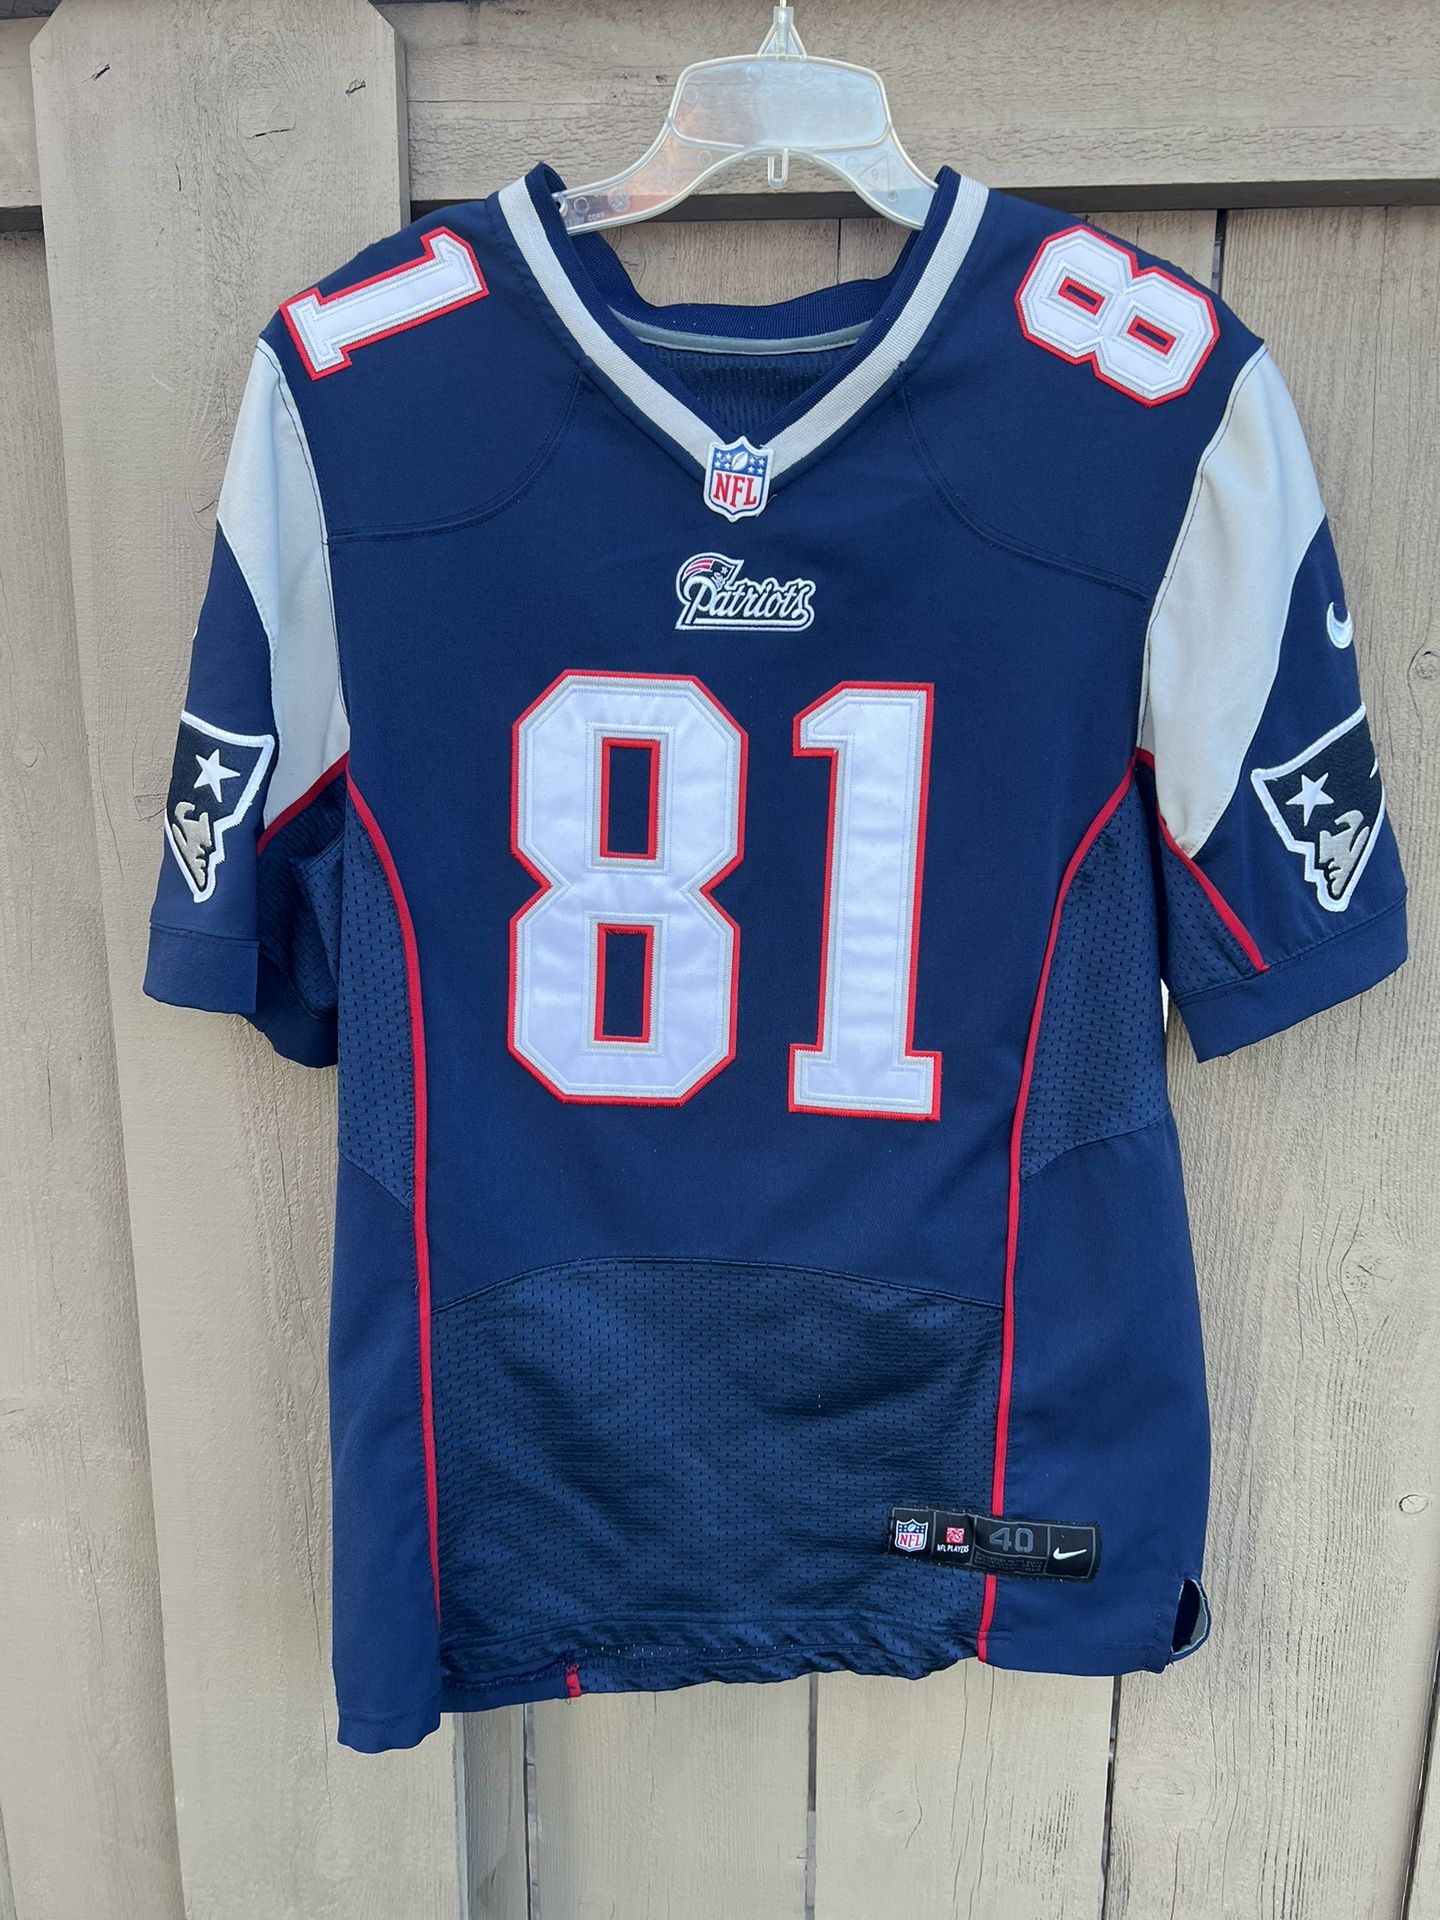 Nike On Field NFL New England Patriots Aaron Hernandez Authentic Jersey Size 40